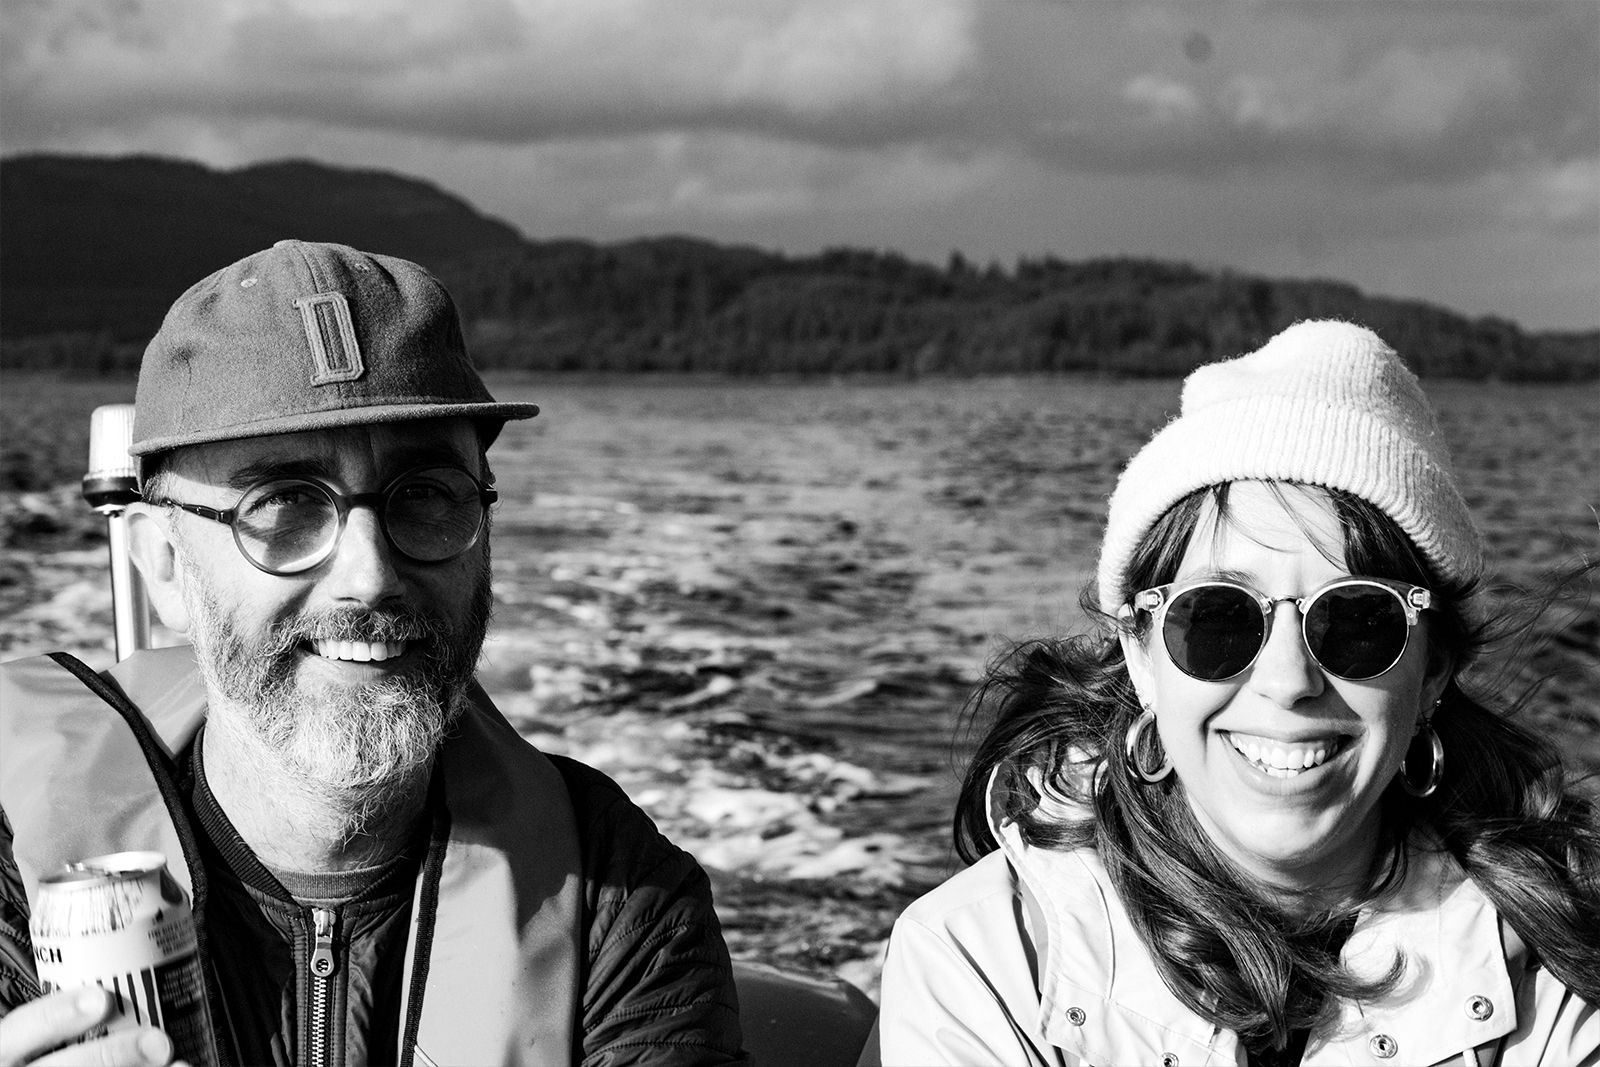 Black and White Image of O Street Directors David Freer and Anna Dunn on a Fishing boat.